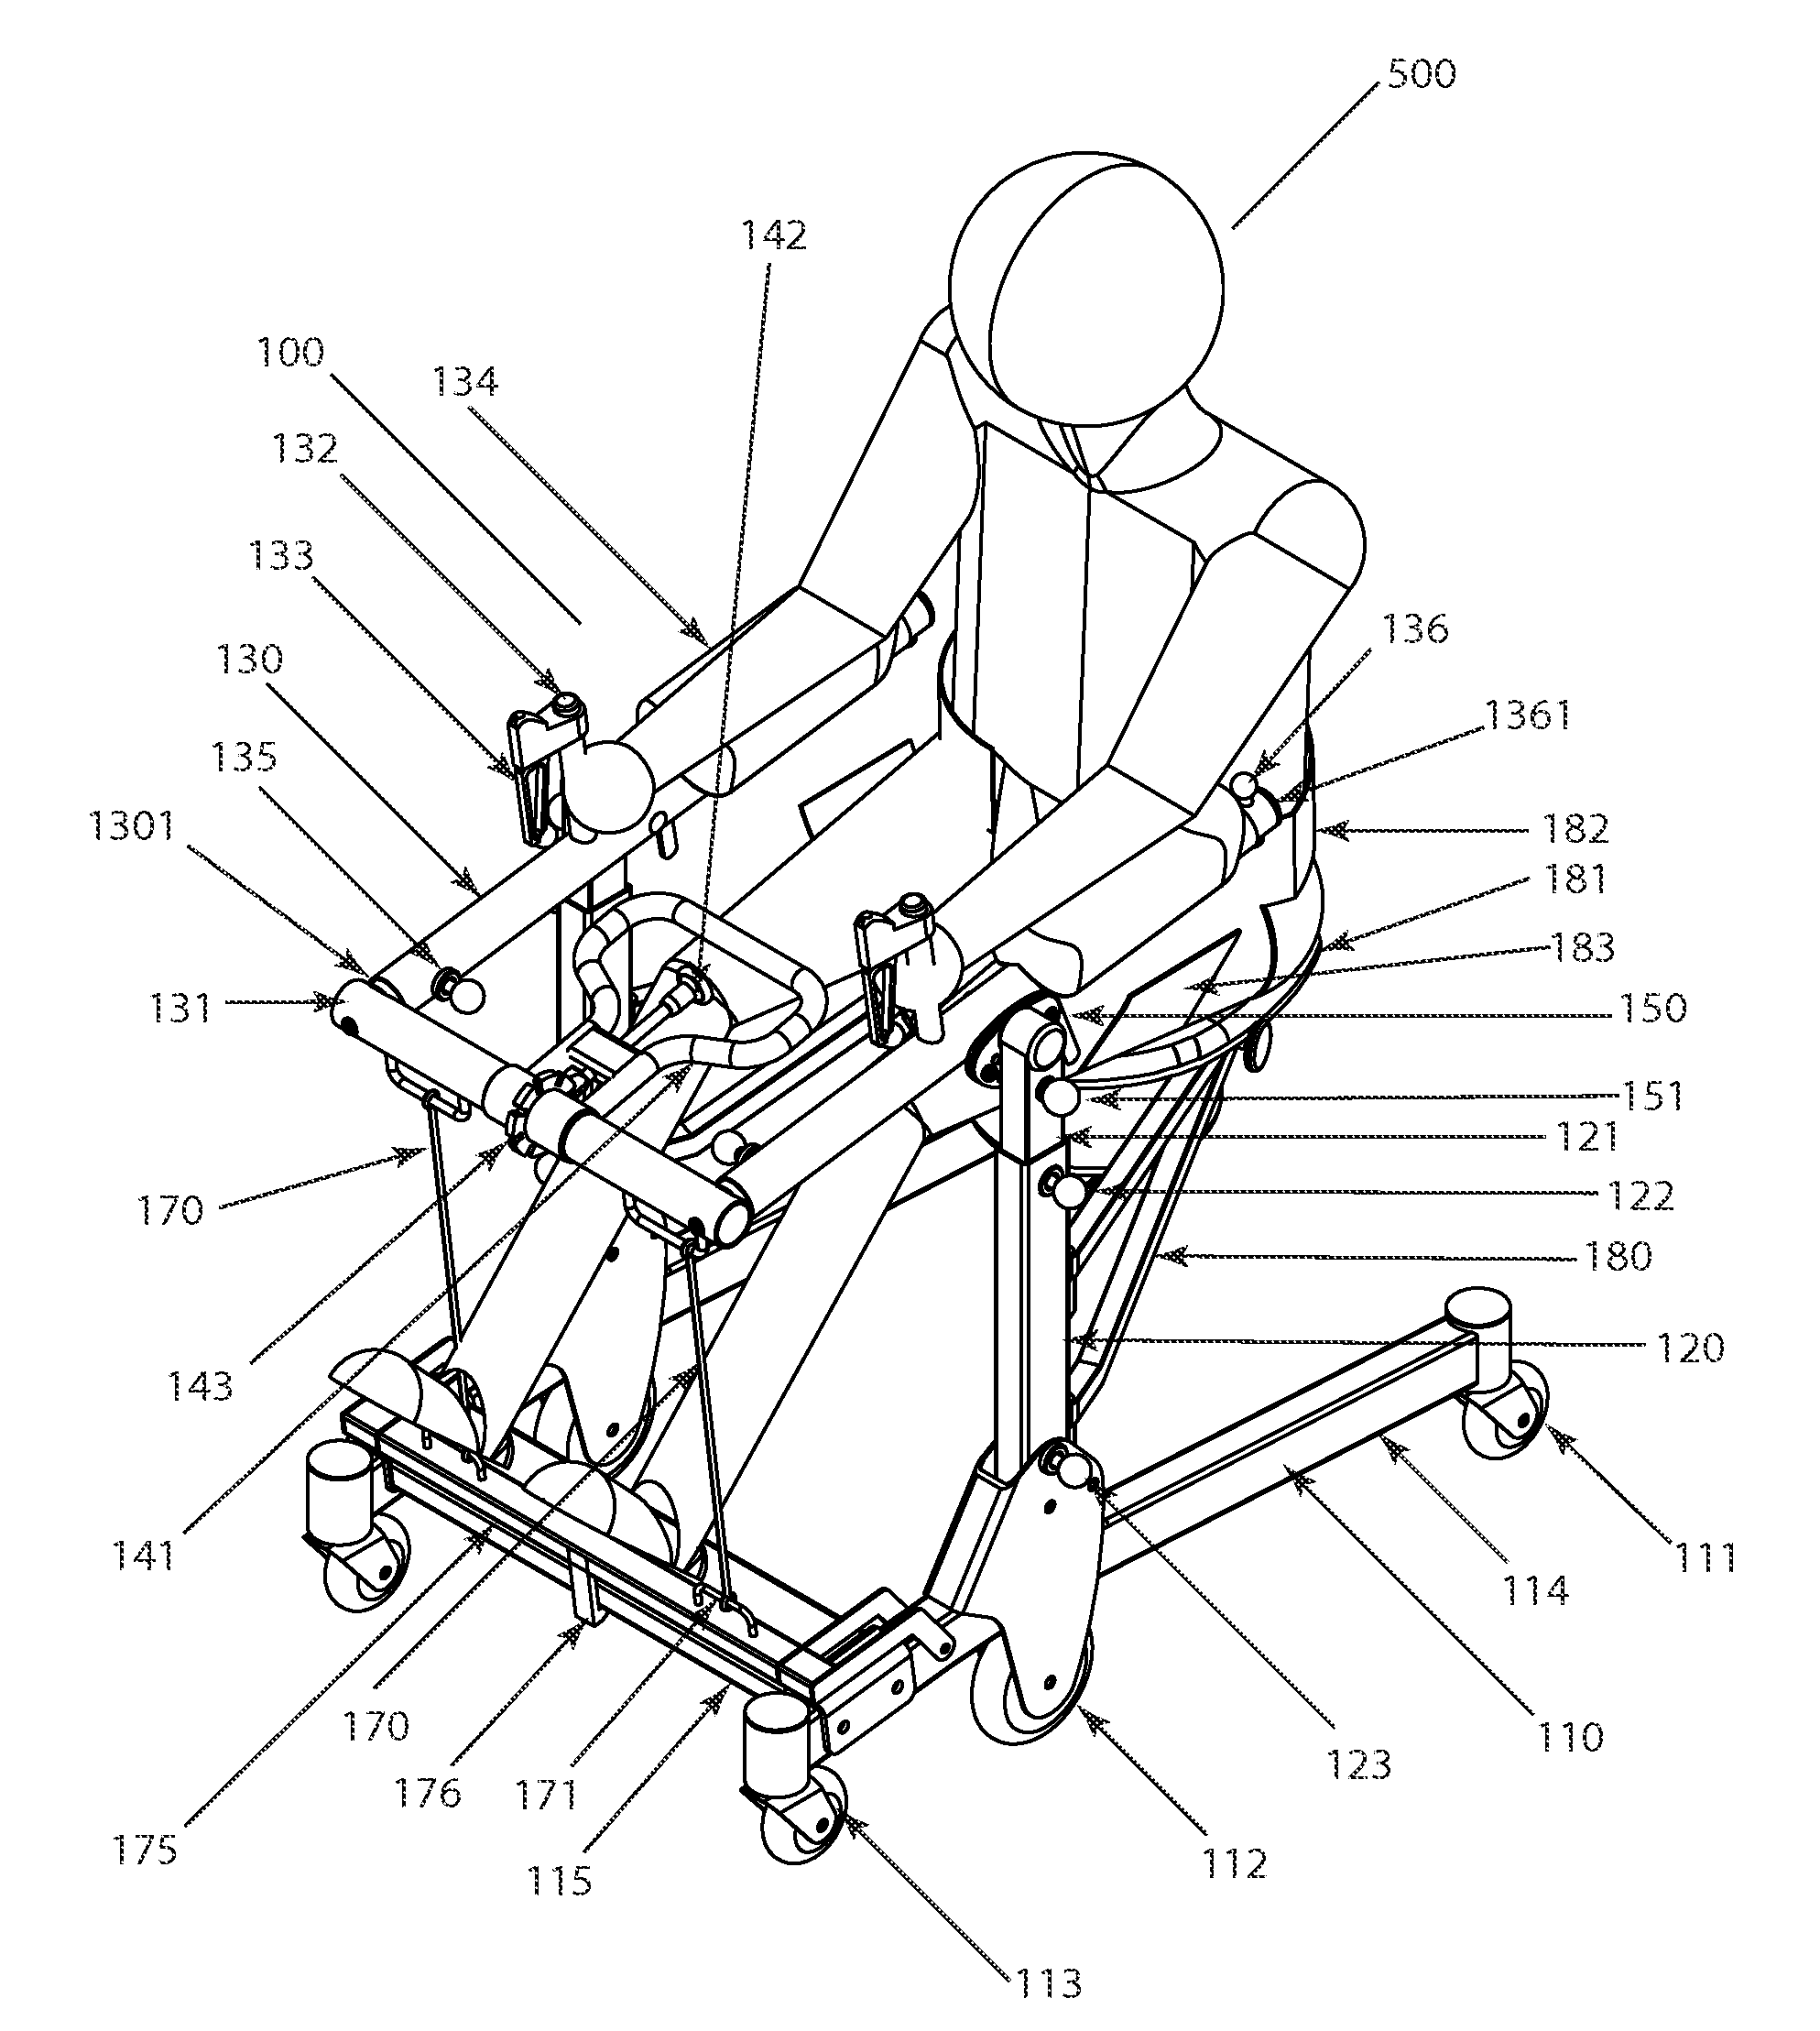 Patient assistance and rehabilitation device and method of use